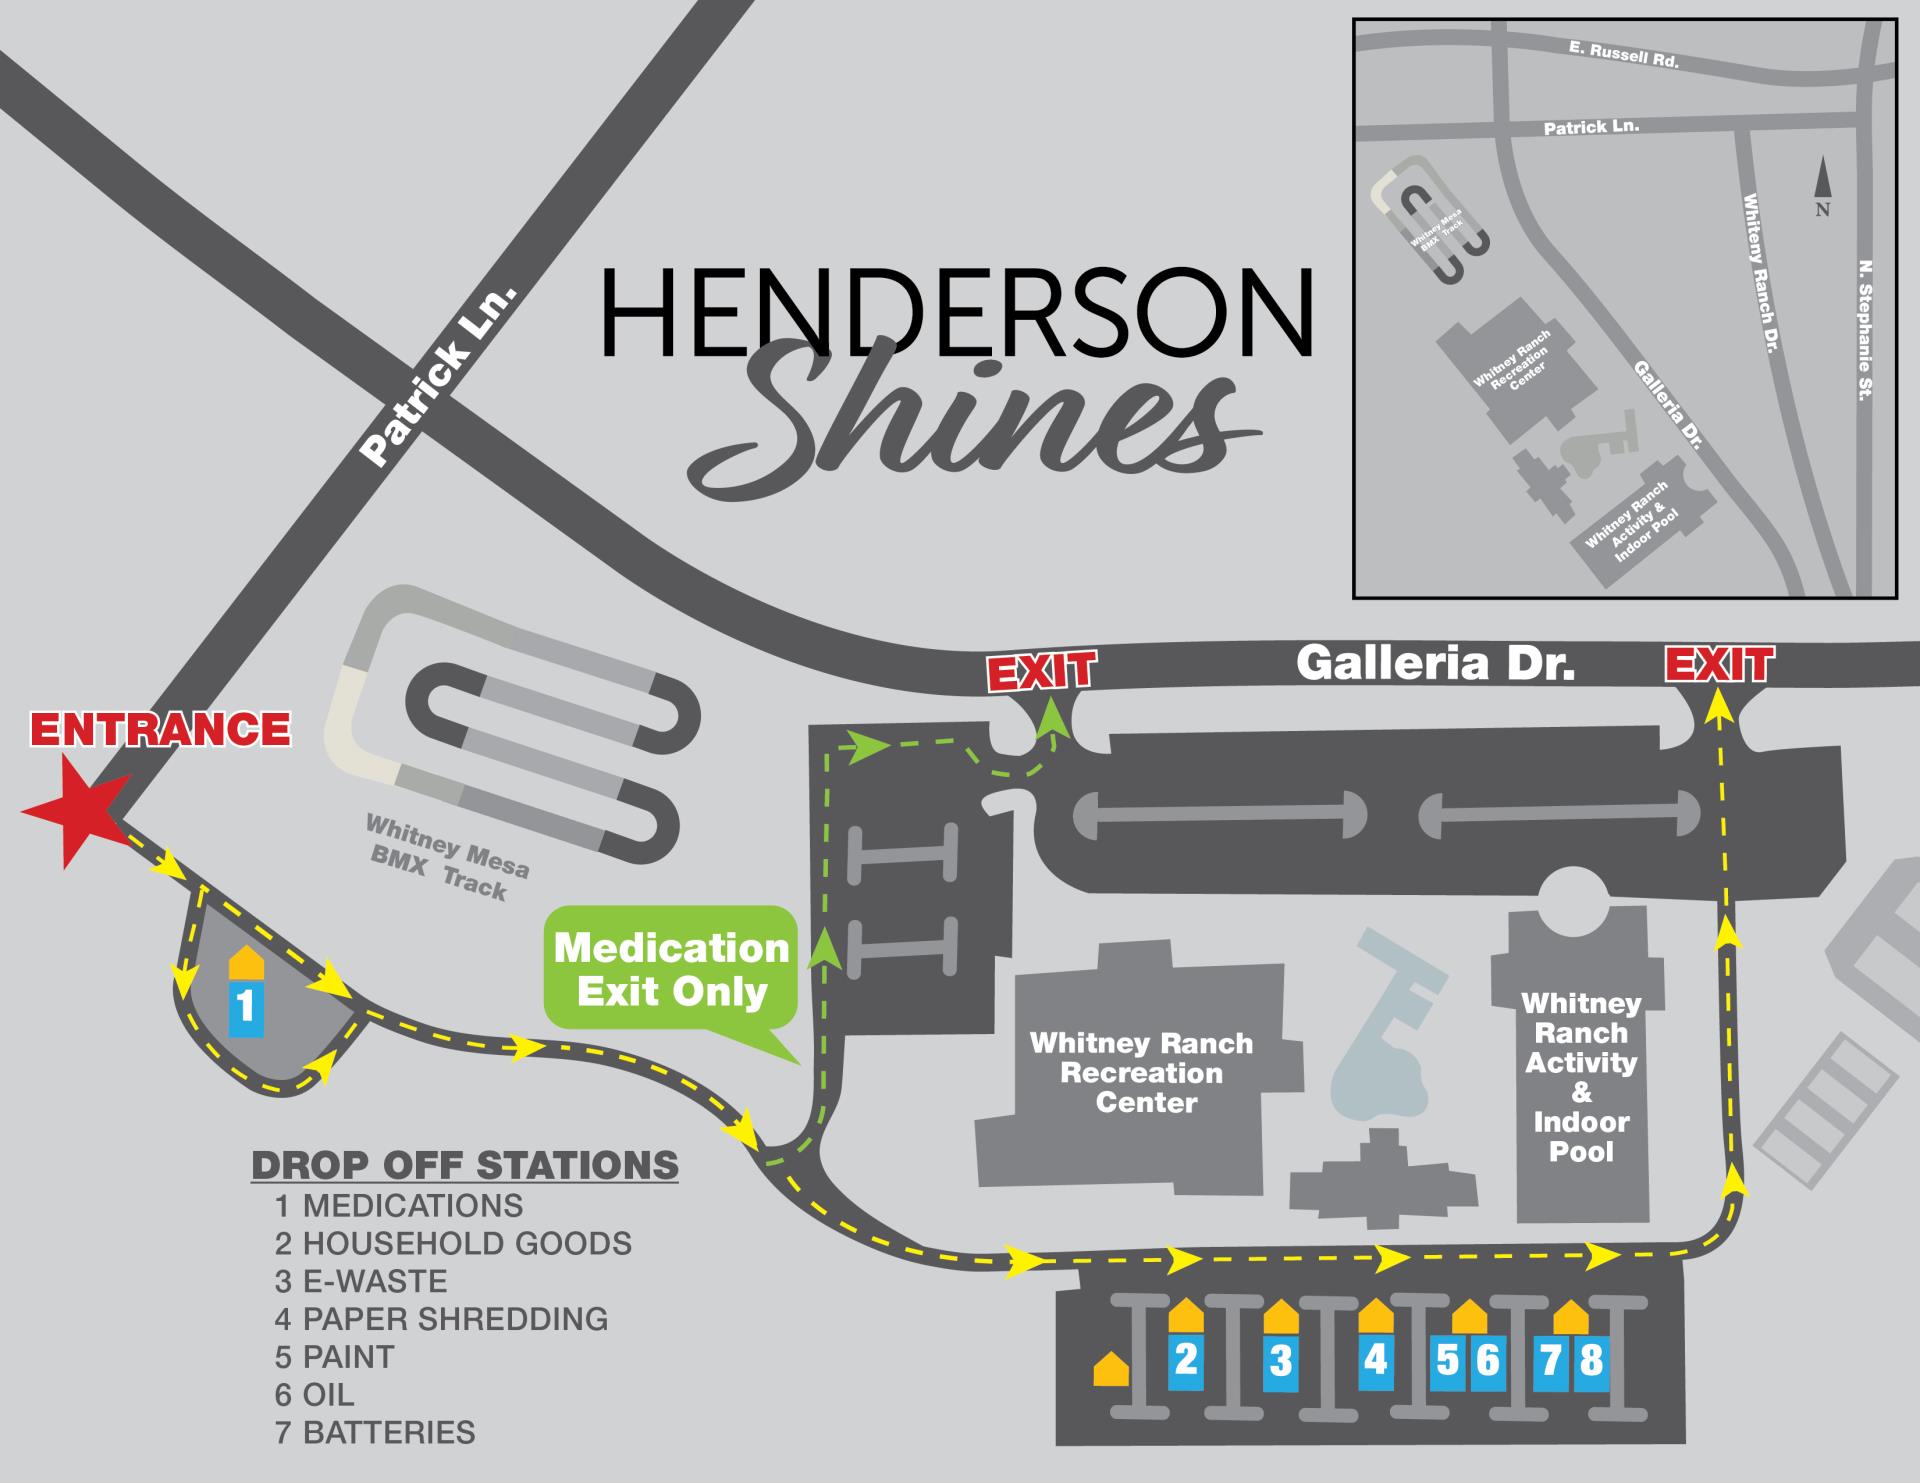 Map of Henderson Shines Area